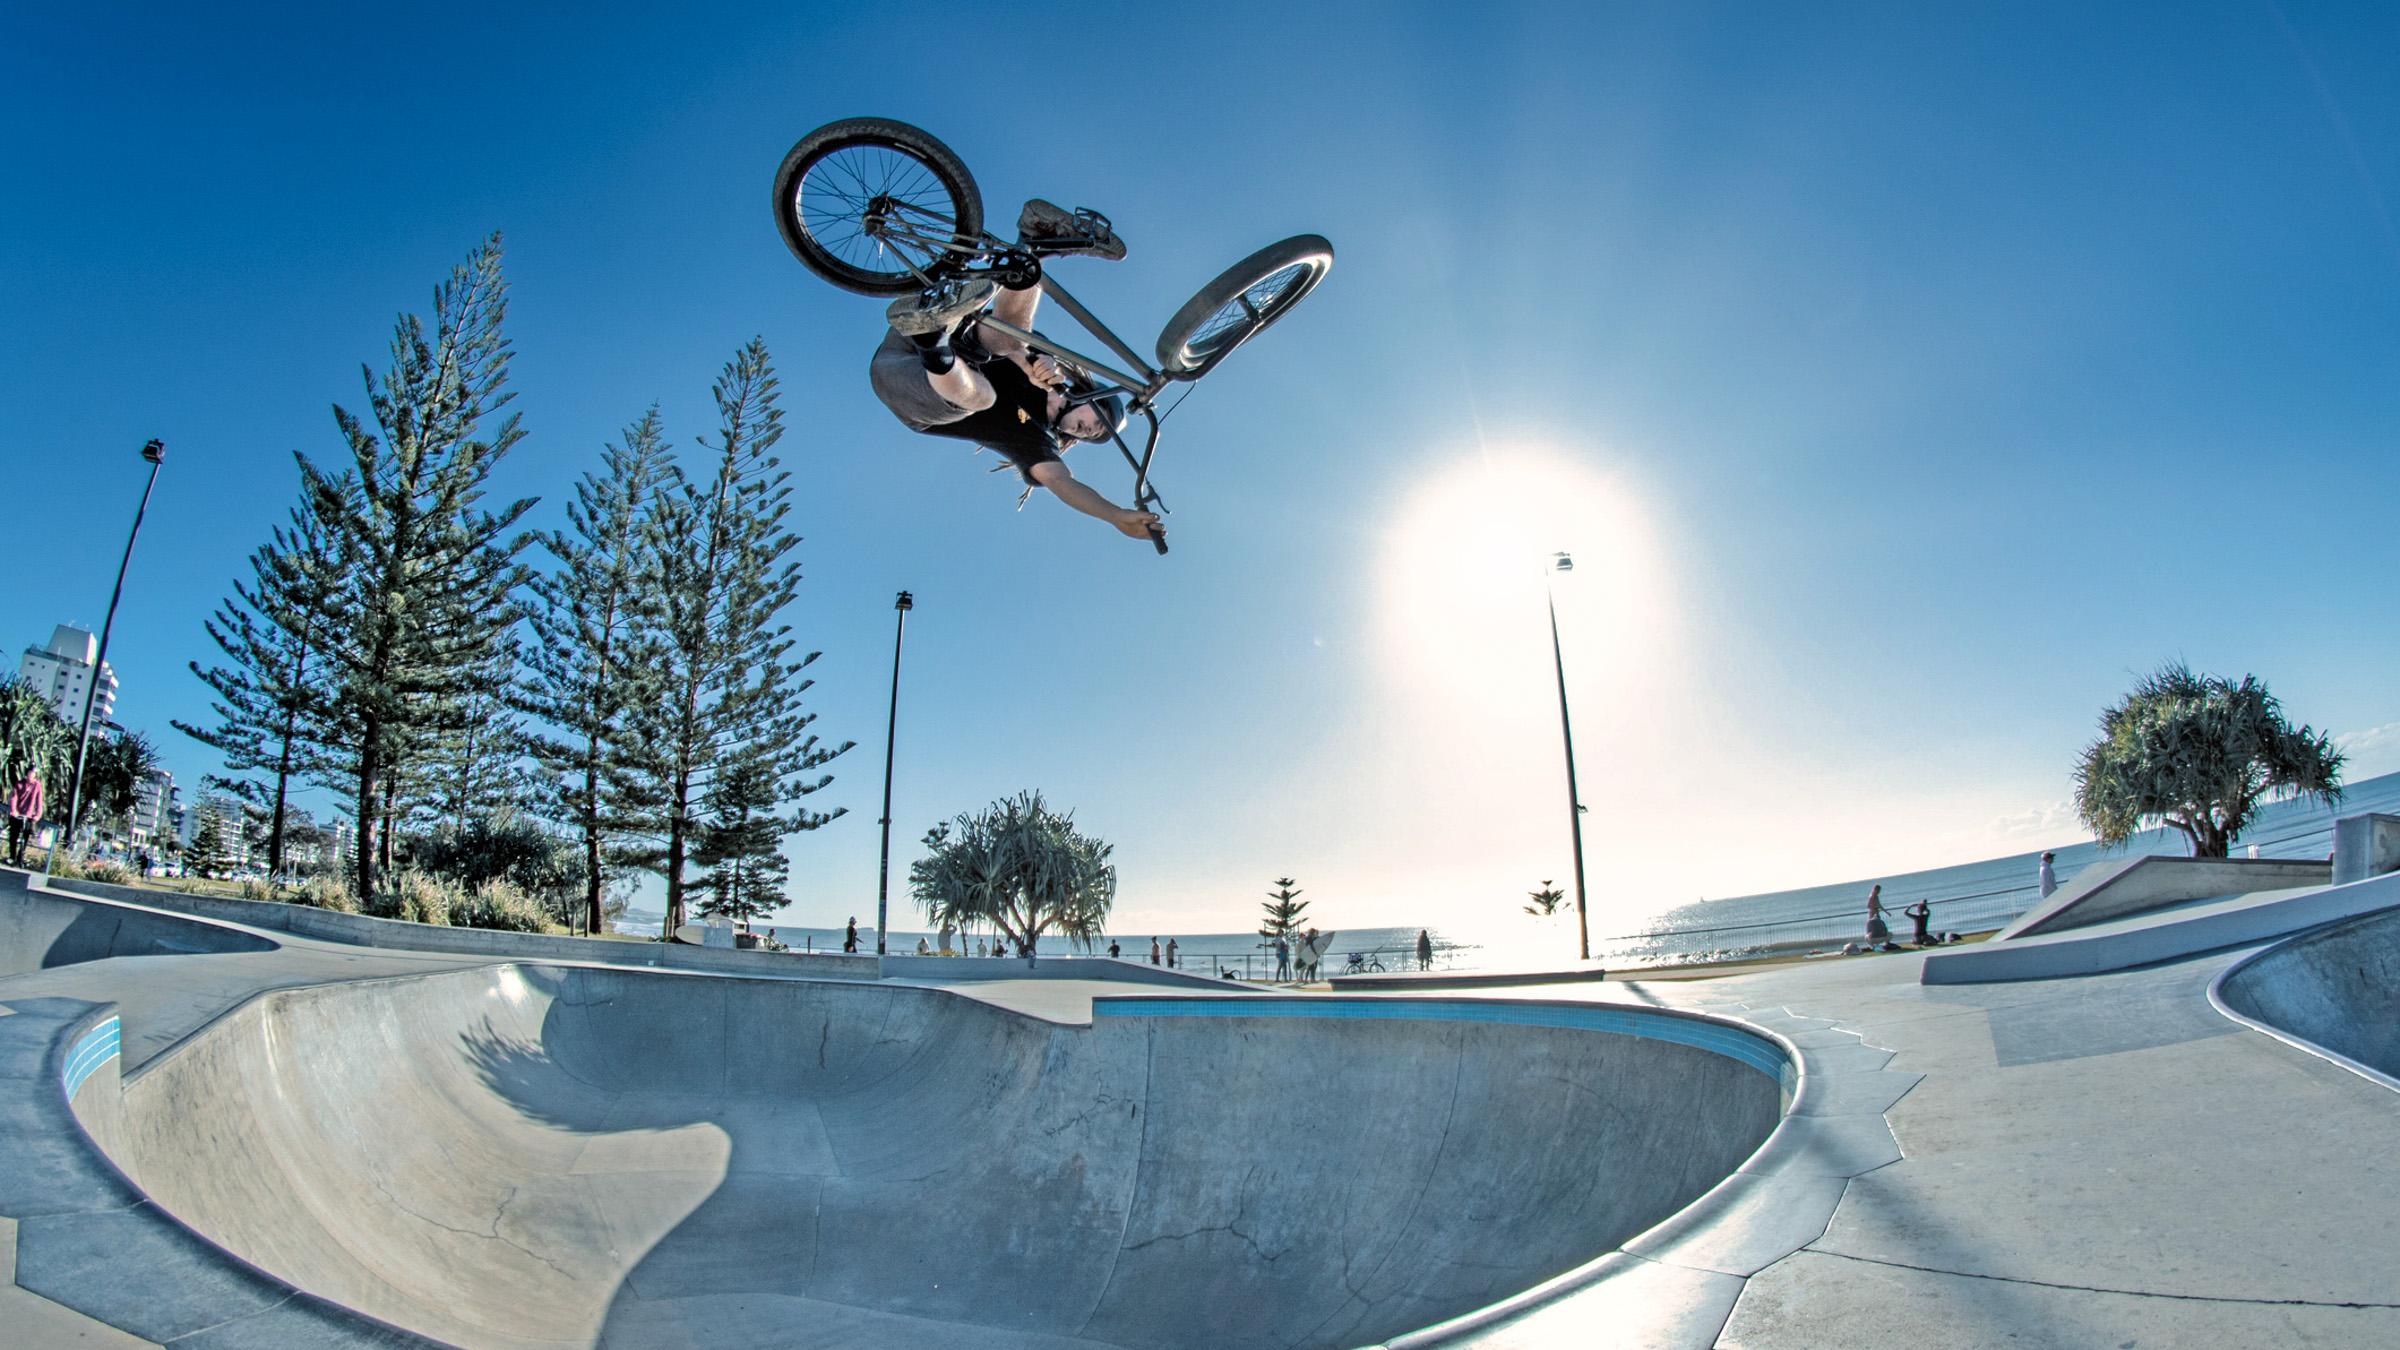 A bike rider in the air doing a trick at Alexandra Headland skate park